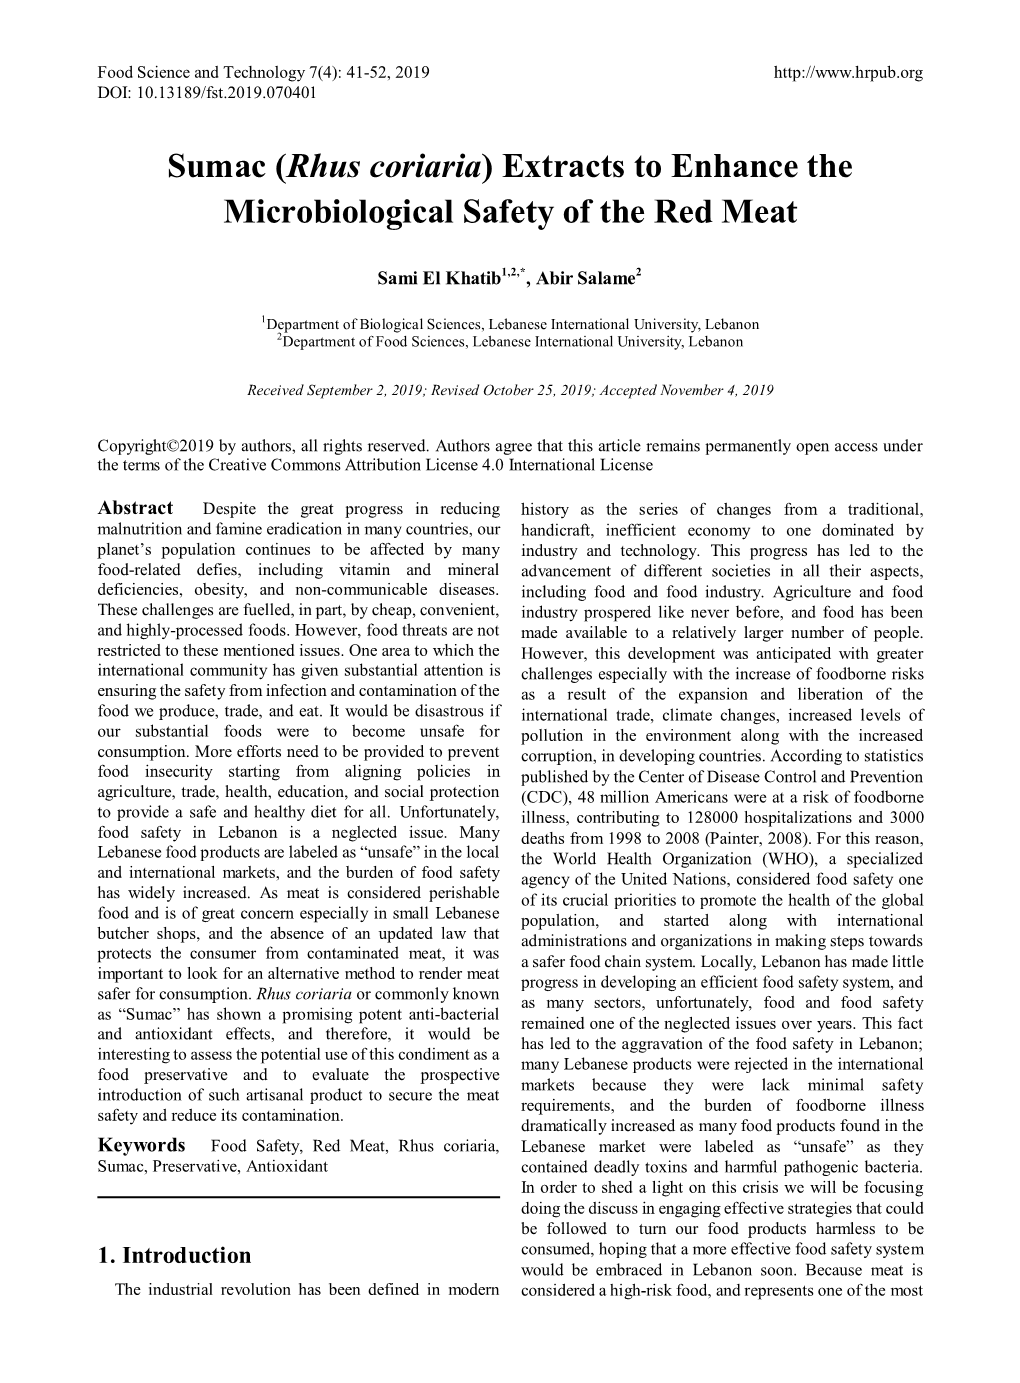 Sumac (Rhus Coriaria) Extracts to Enhance the Microbiological Safety of the Red Meat